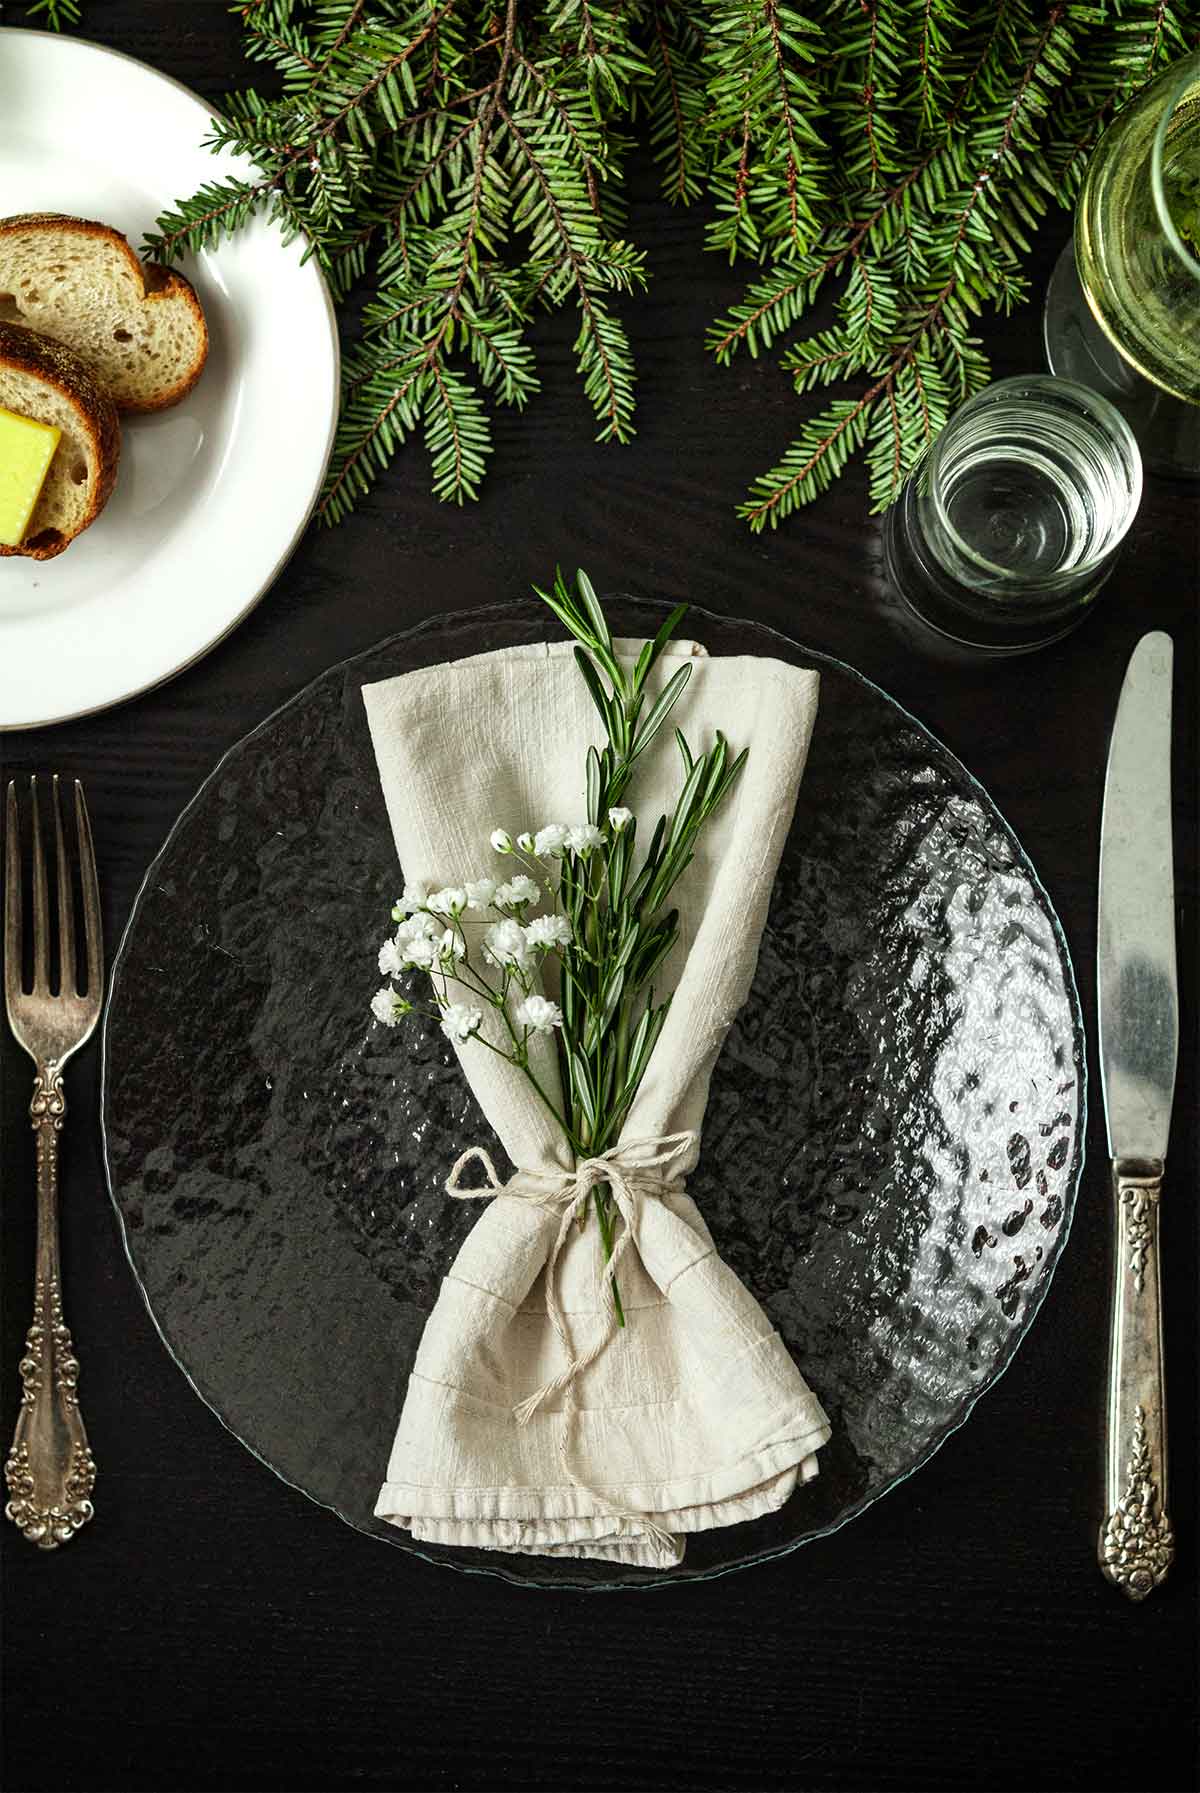 Rosemary and Baby’s Breath in a napkin on a table with holiday greenery, a plate of bread, silverware and glassware.